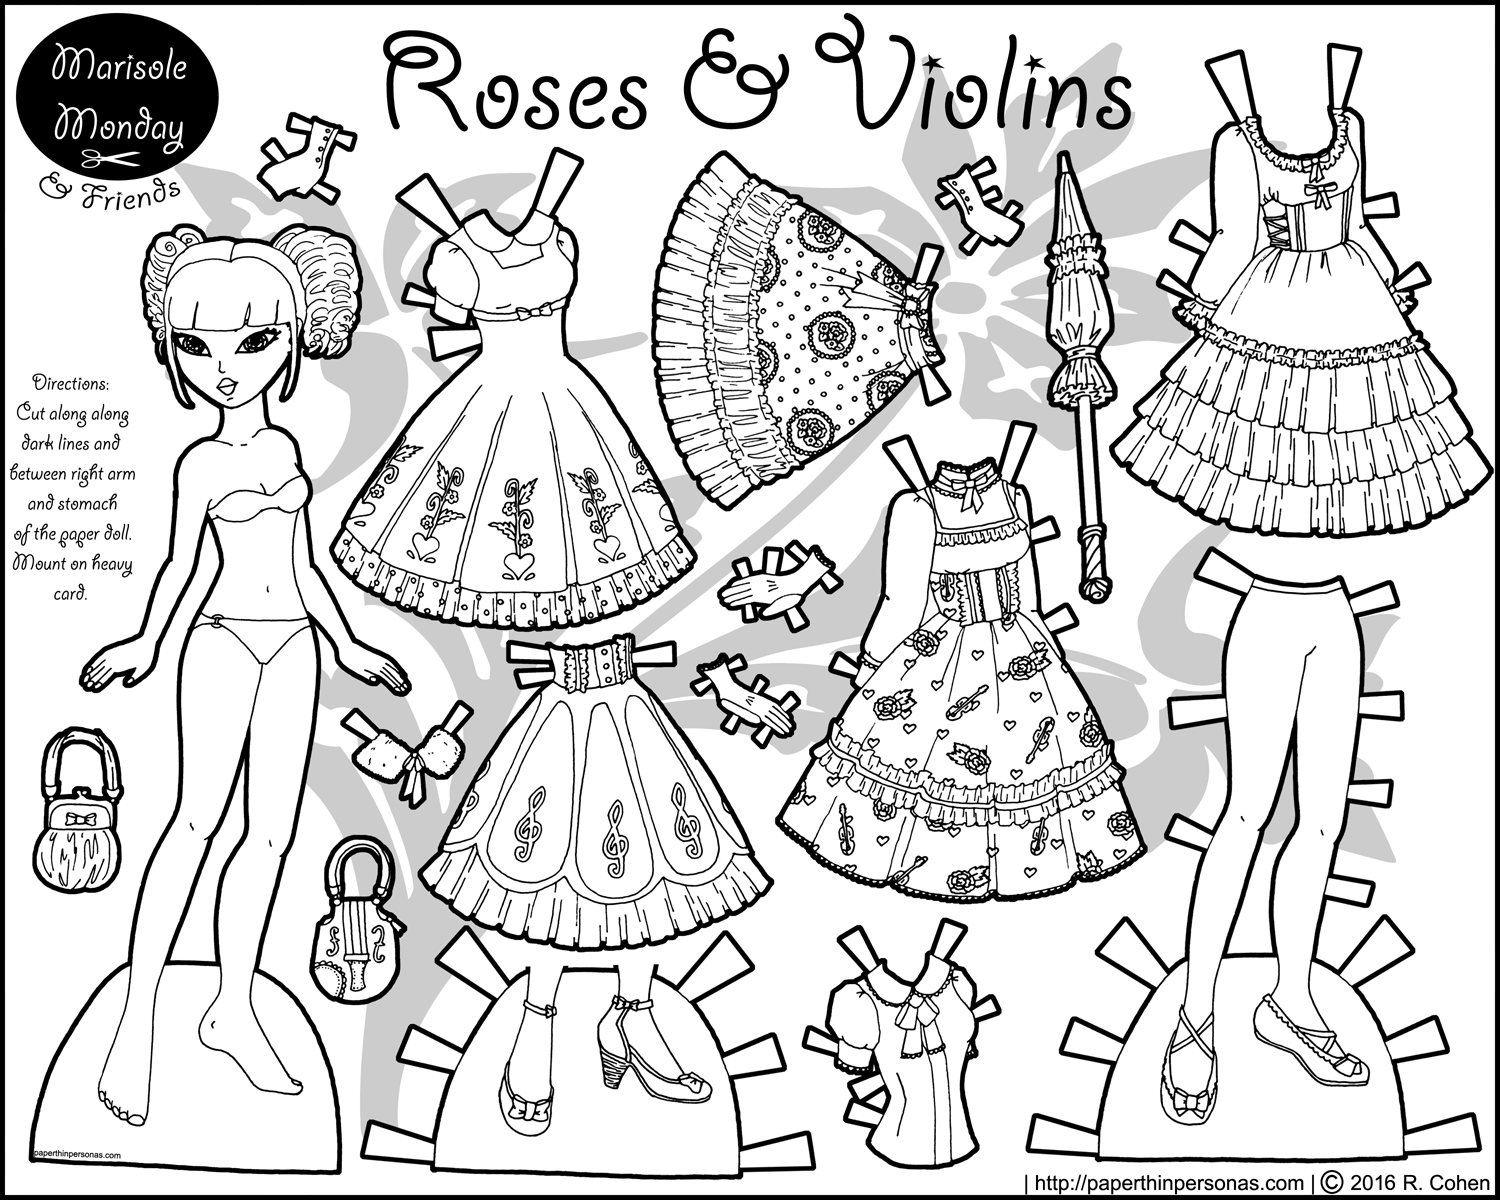 A Classic Lolita fashion paper doll coloring page from paperthinpersonas